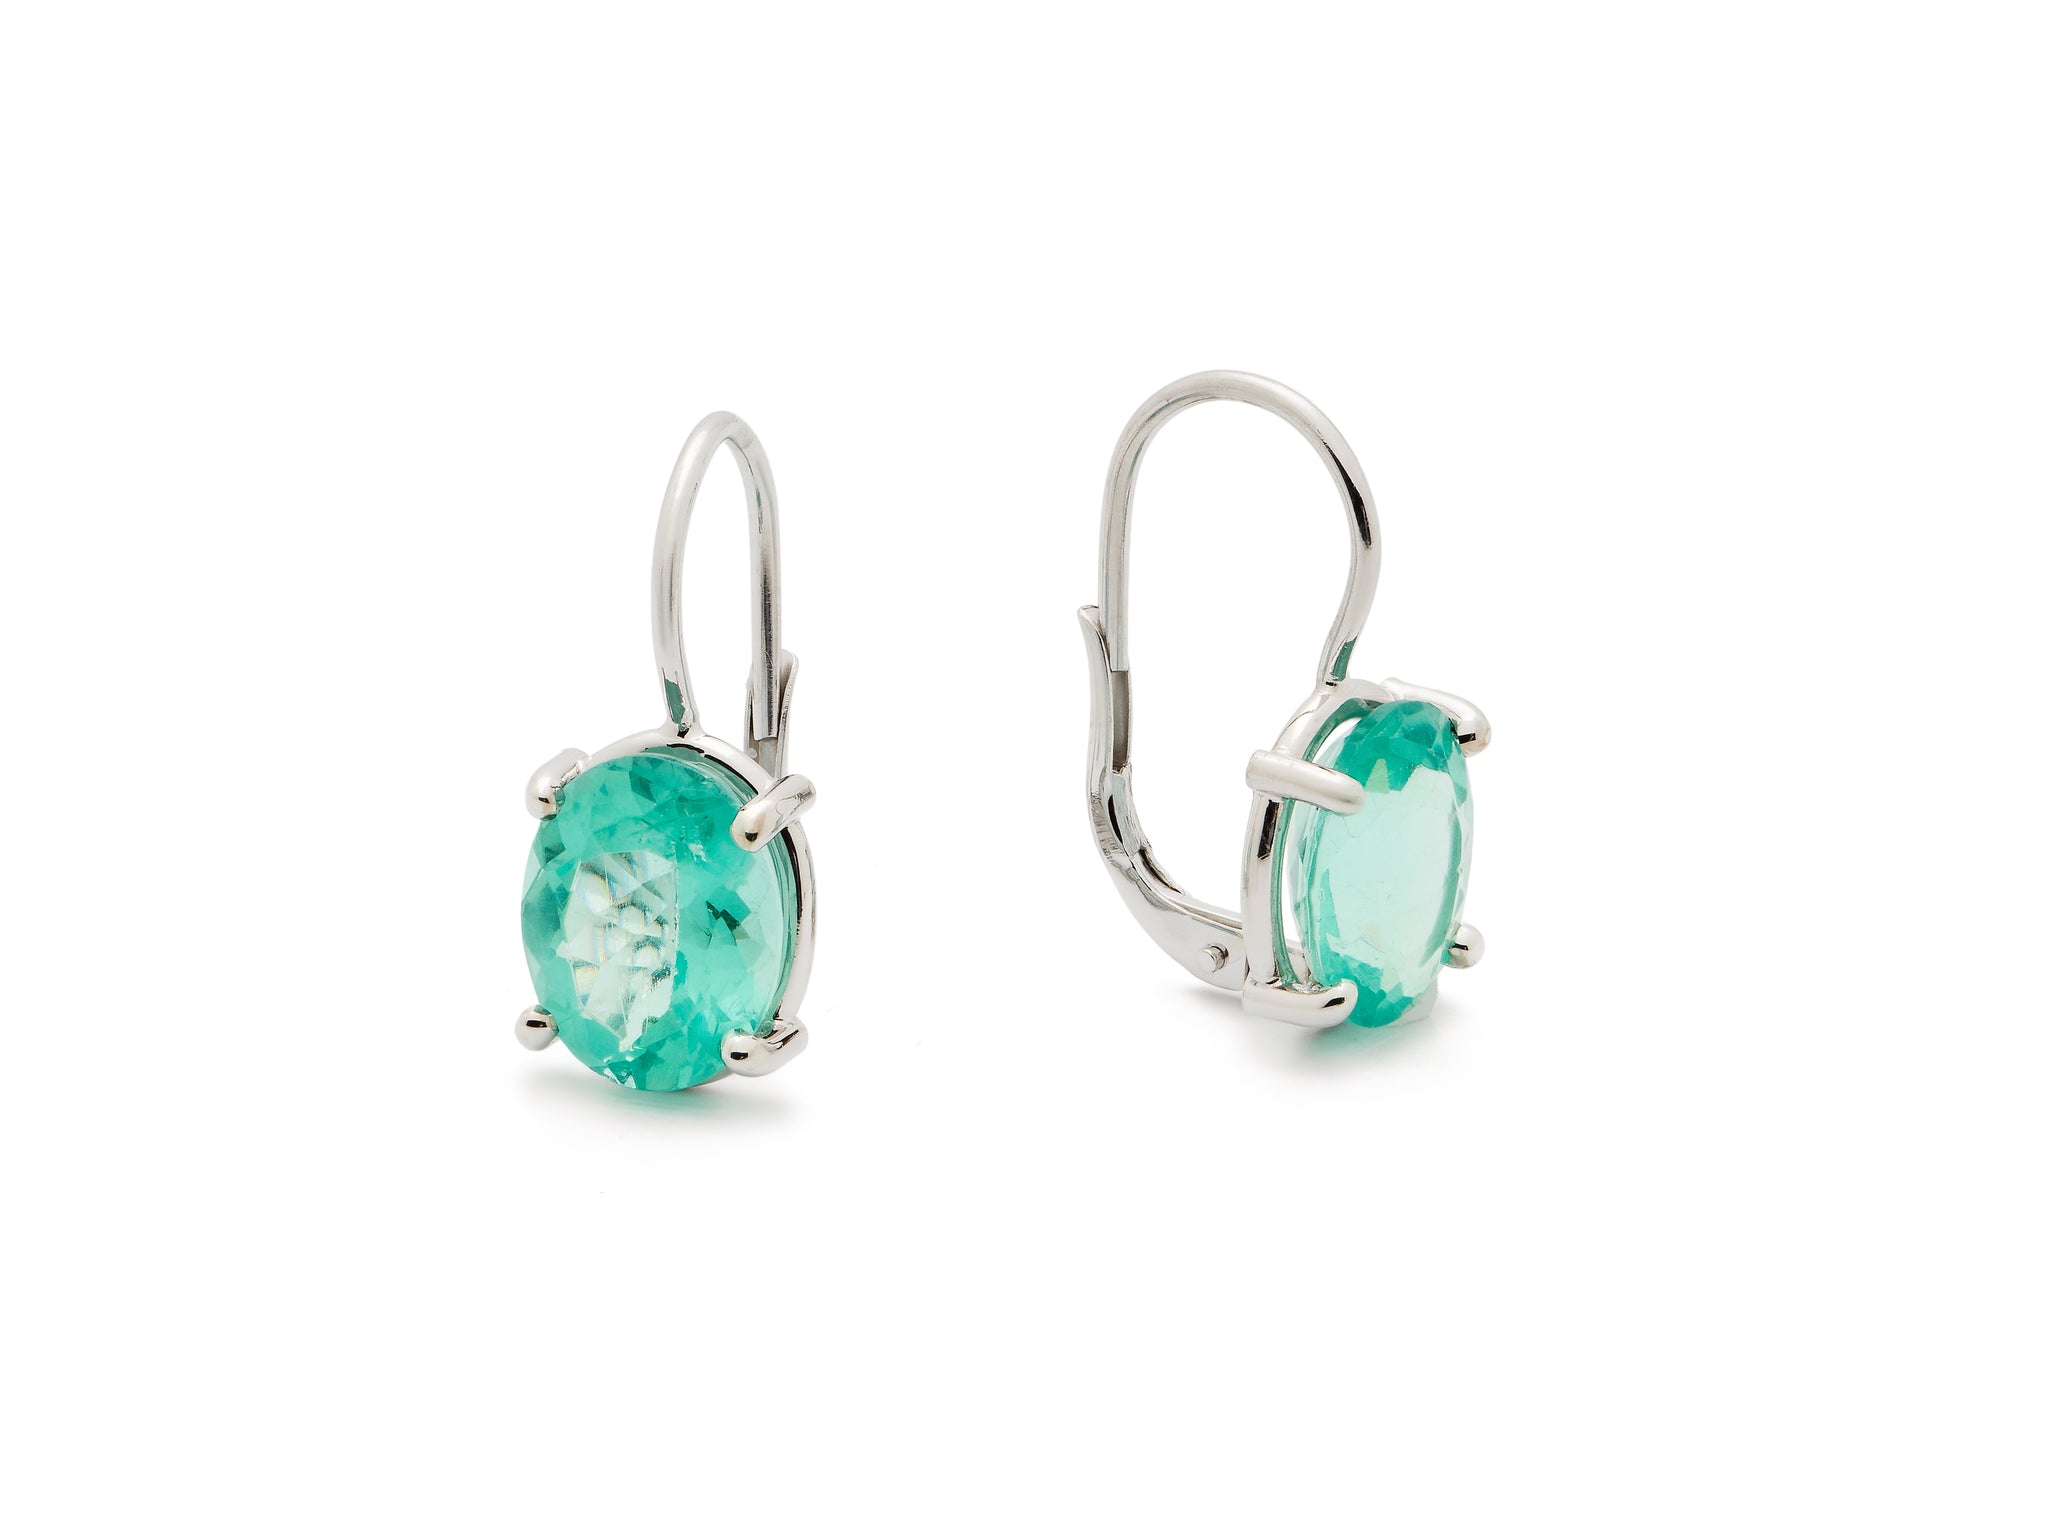 18 krt white gold earrings with Apatite